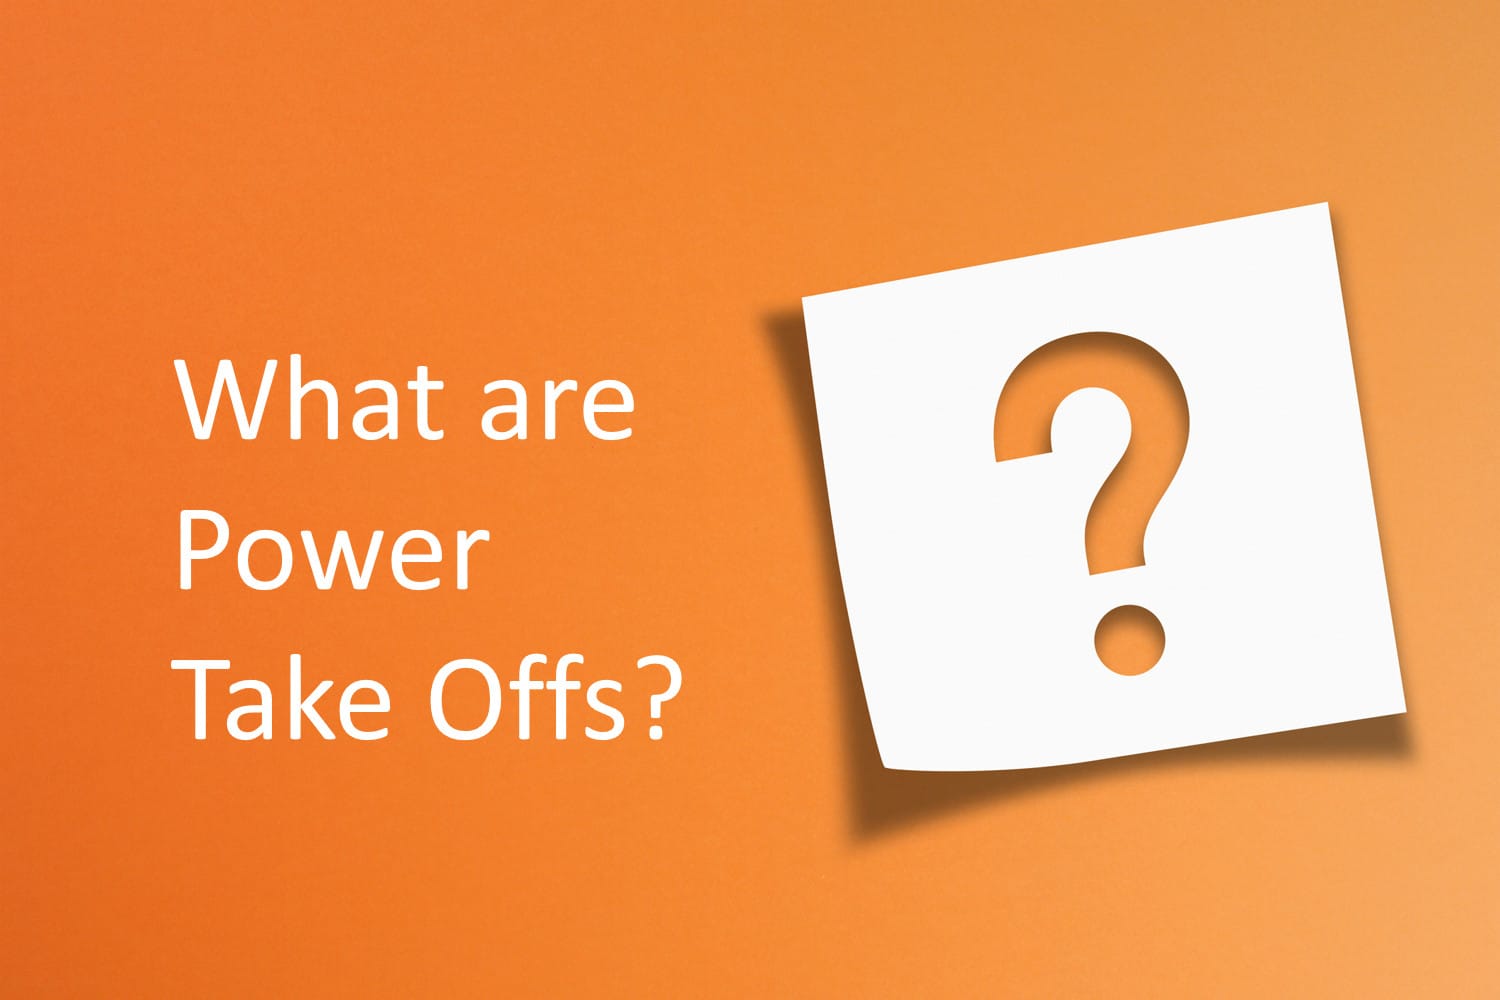 What Are Power Take Offs?